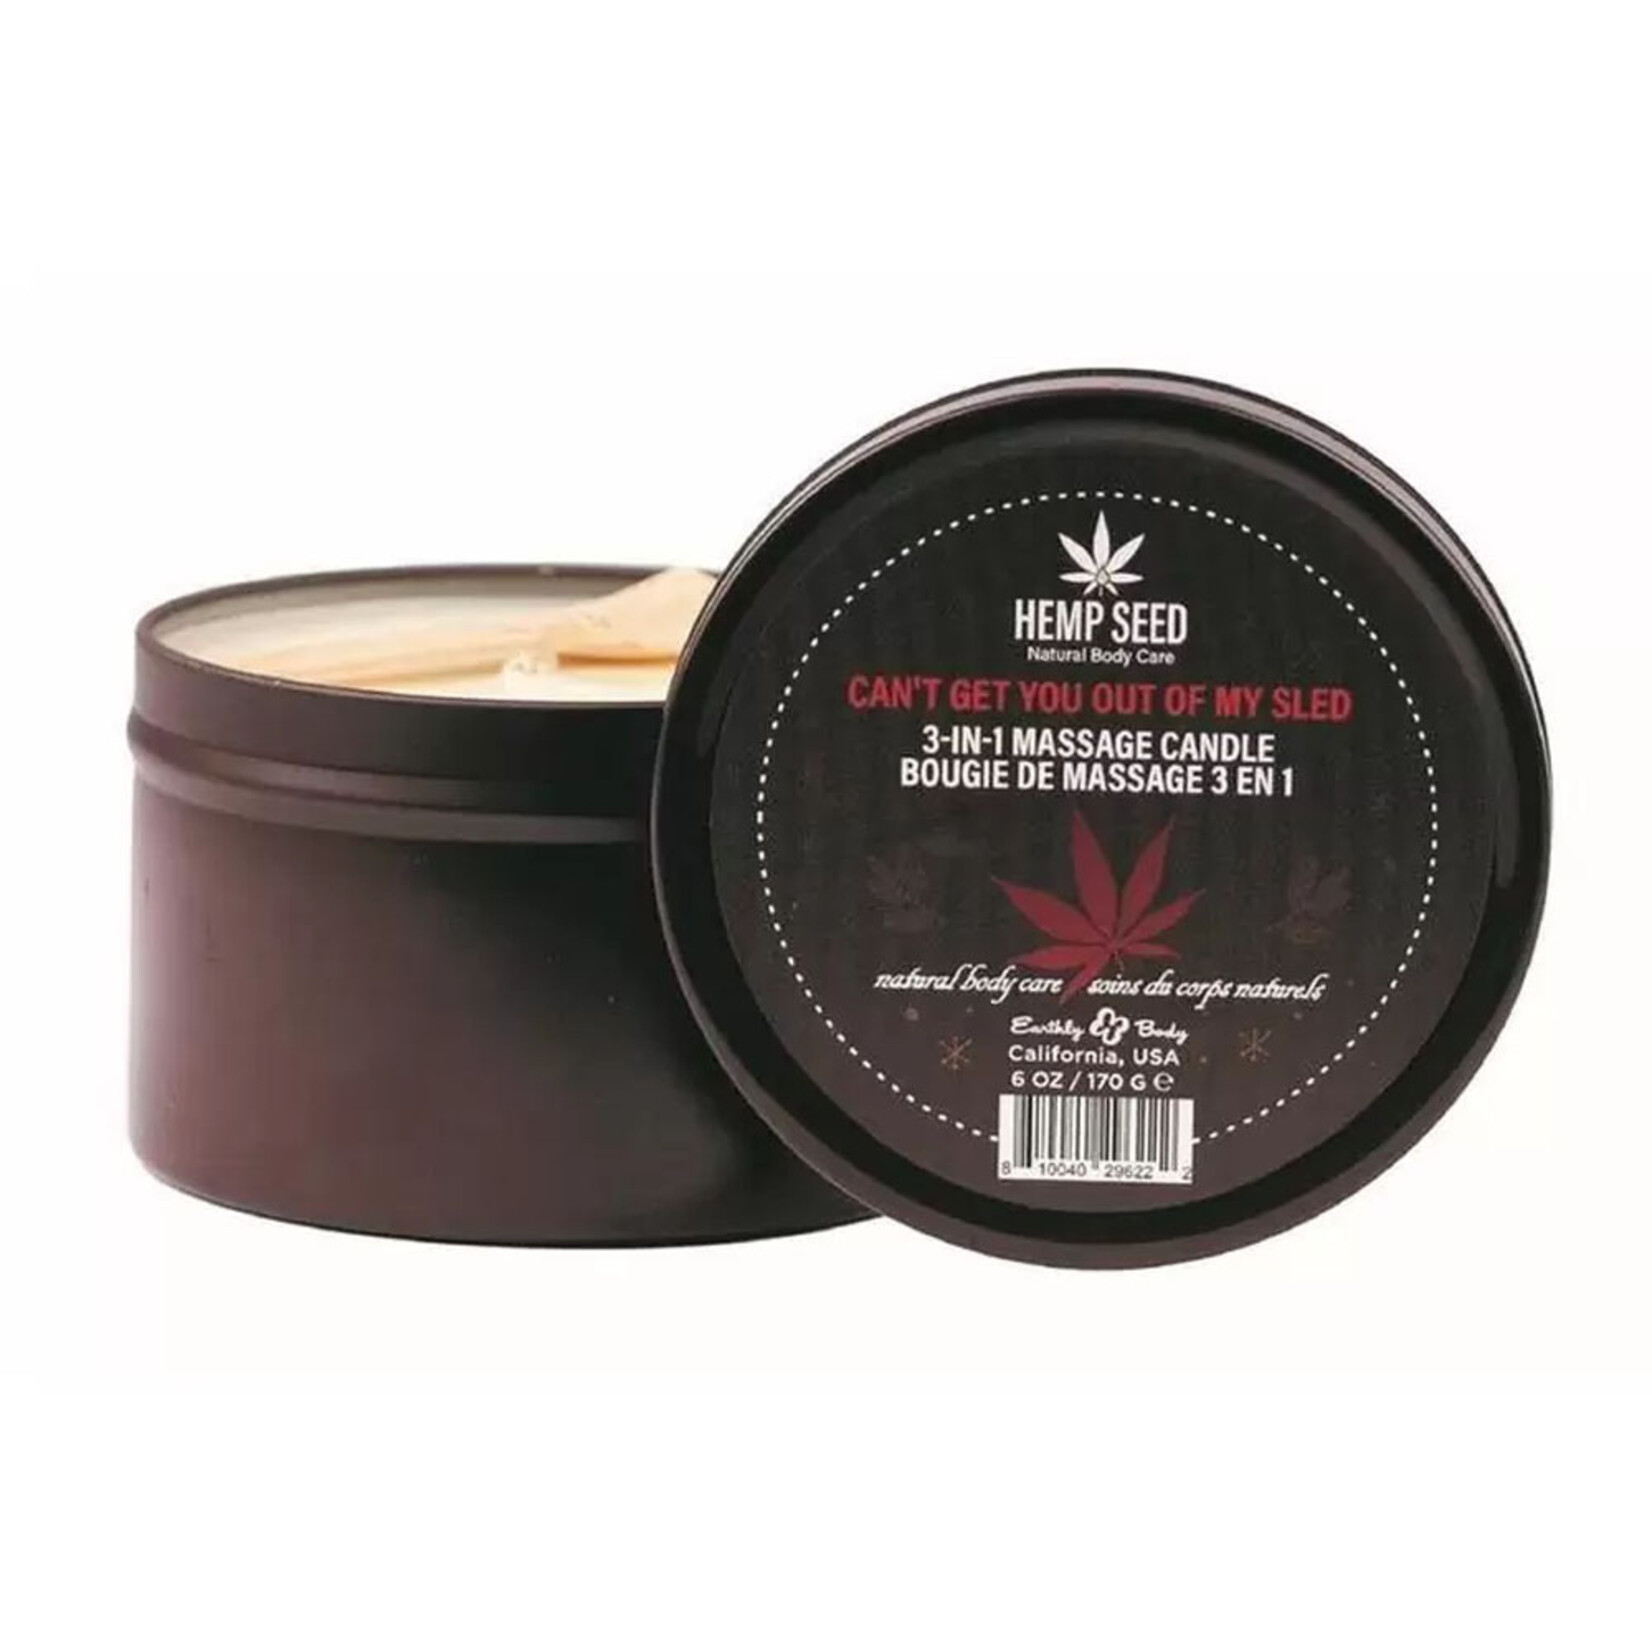 EARTHLY BODY EARTHLY BODY - 3-IN-1 MASSAGE CANDLE 6OZ IN CAN'T GET YOU OUT OF MY SLED CAN'T GET YOU OUT OF MY SLED